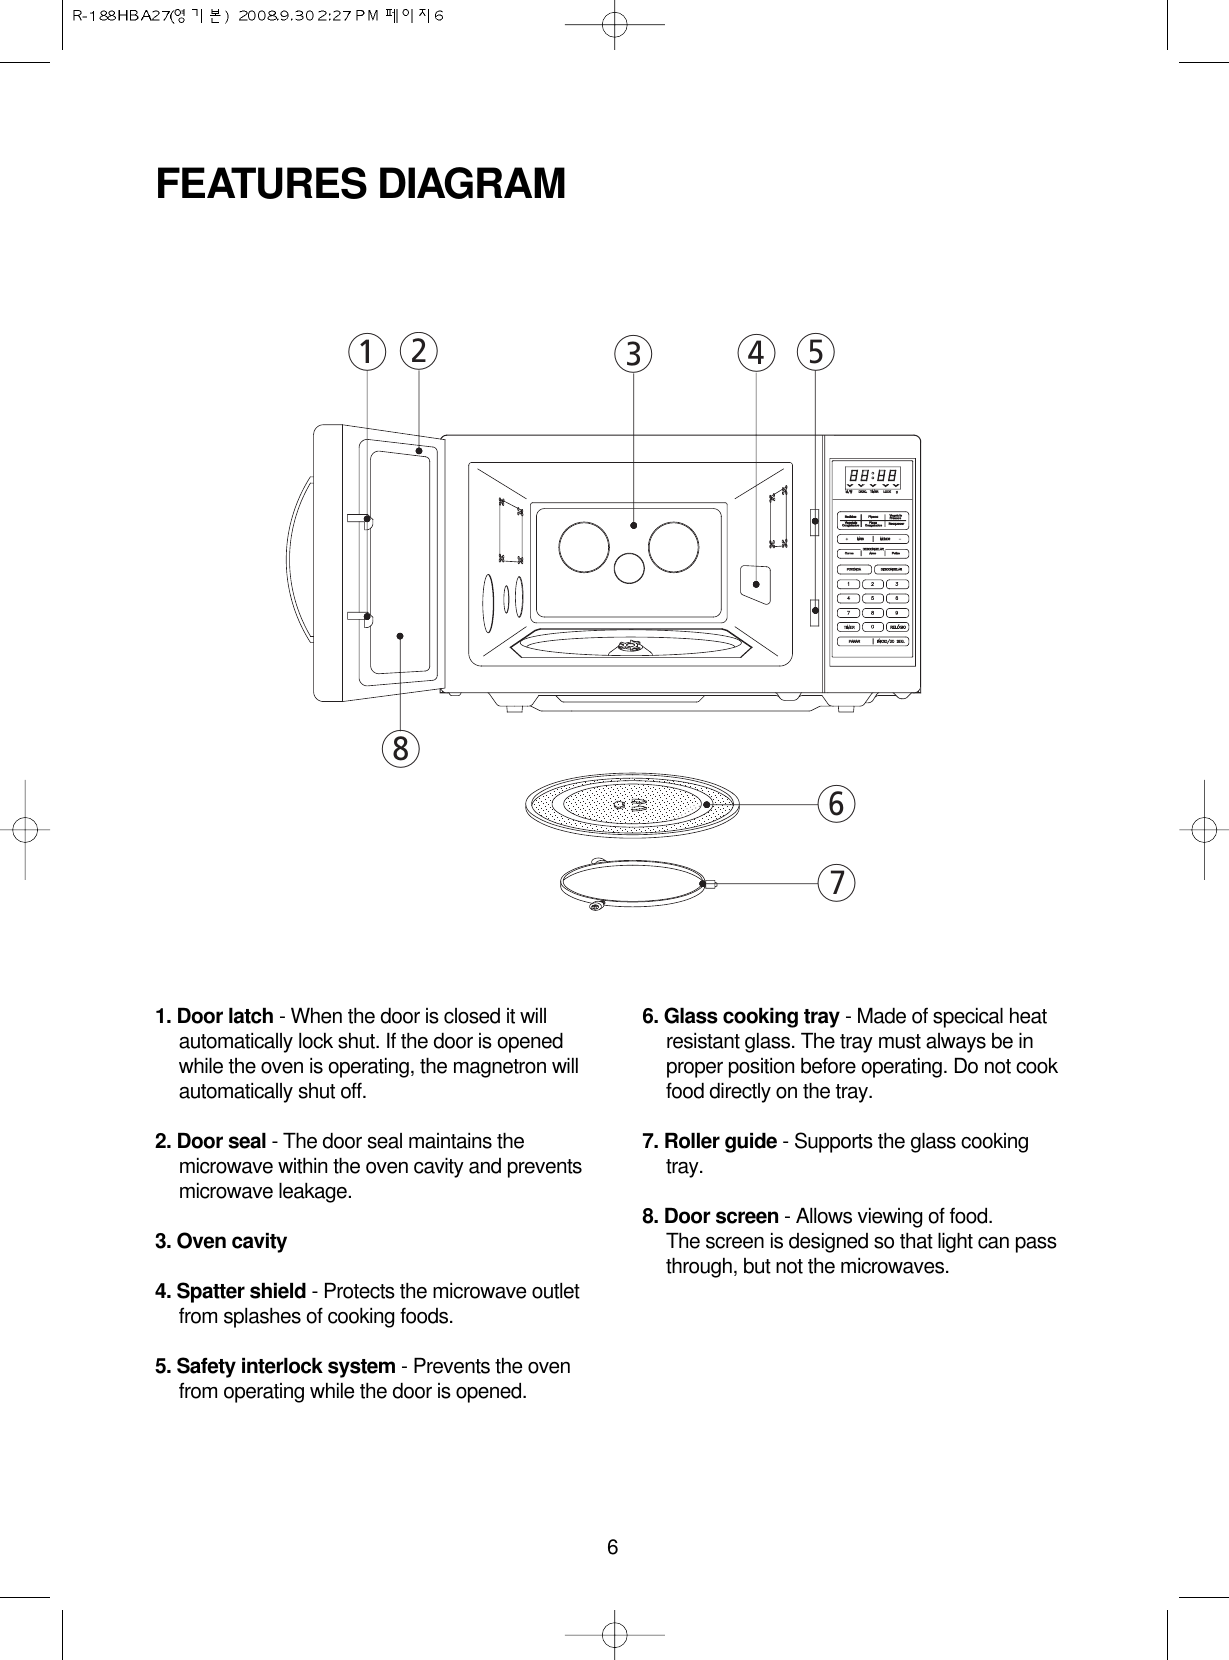 61. Door latch - When the door is closed it willautomatically lock shut. If the door is openedwhile the oven is operating, the magnetron willautomatically shut off.2. Door seal - The door seal maintains themicrowave within the oven cavity and preventsmicrowave leakage.3. Oven cavity4. Spatter shield - Protects the microwave outletfrom splashes of cooking foods.5. Safety interlock system - Prevents the ovenfrom operating while the door is opened.6. Glass cooking tray - Made of specical heatresistant glass. The tray must always be inproper position before operating. Do not cookfood directly on the tray.7. Roller guide - Supports the glass cookingtray.8. Door screen - Allows viewing of food. The screen is designed so that light can passthrough, but not the microwaves.FEATURES DIAGRAM86754321